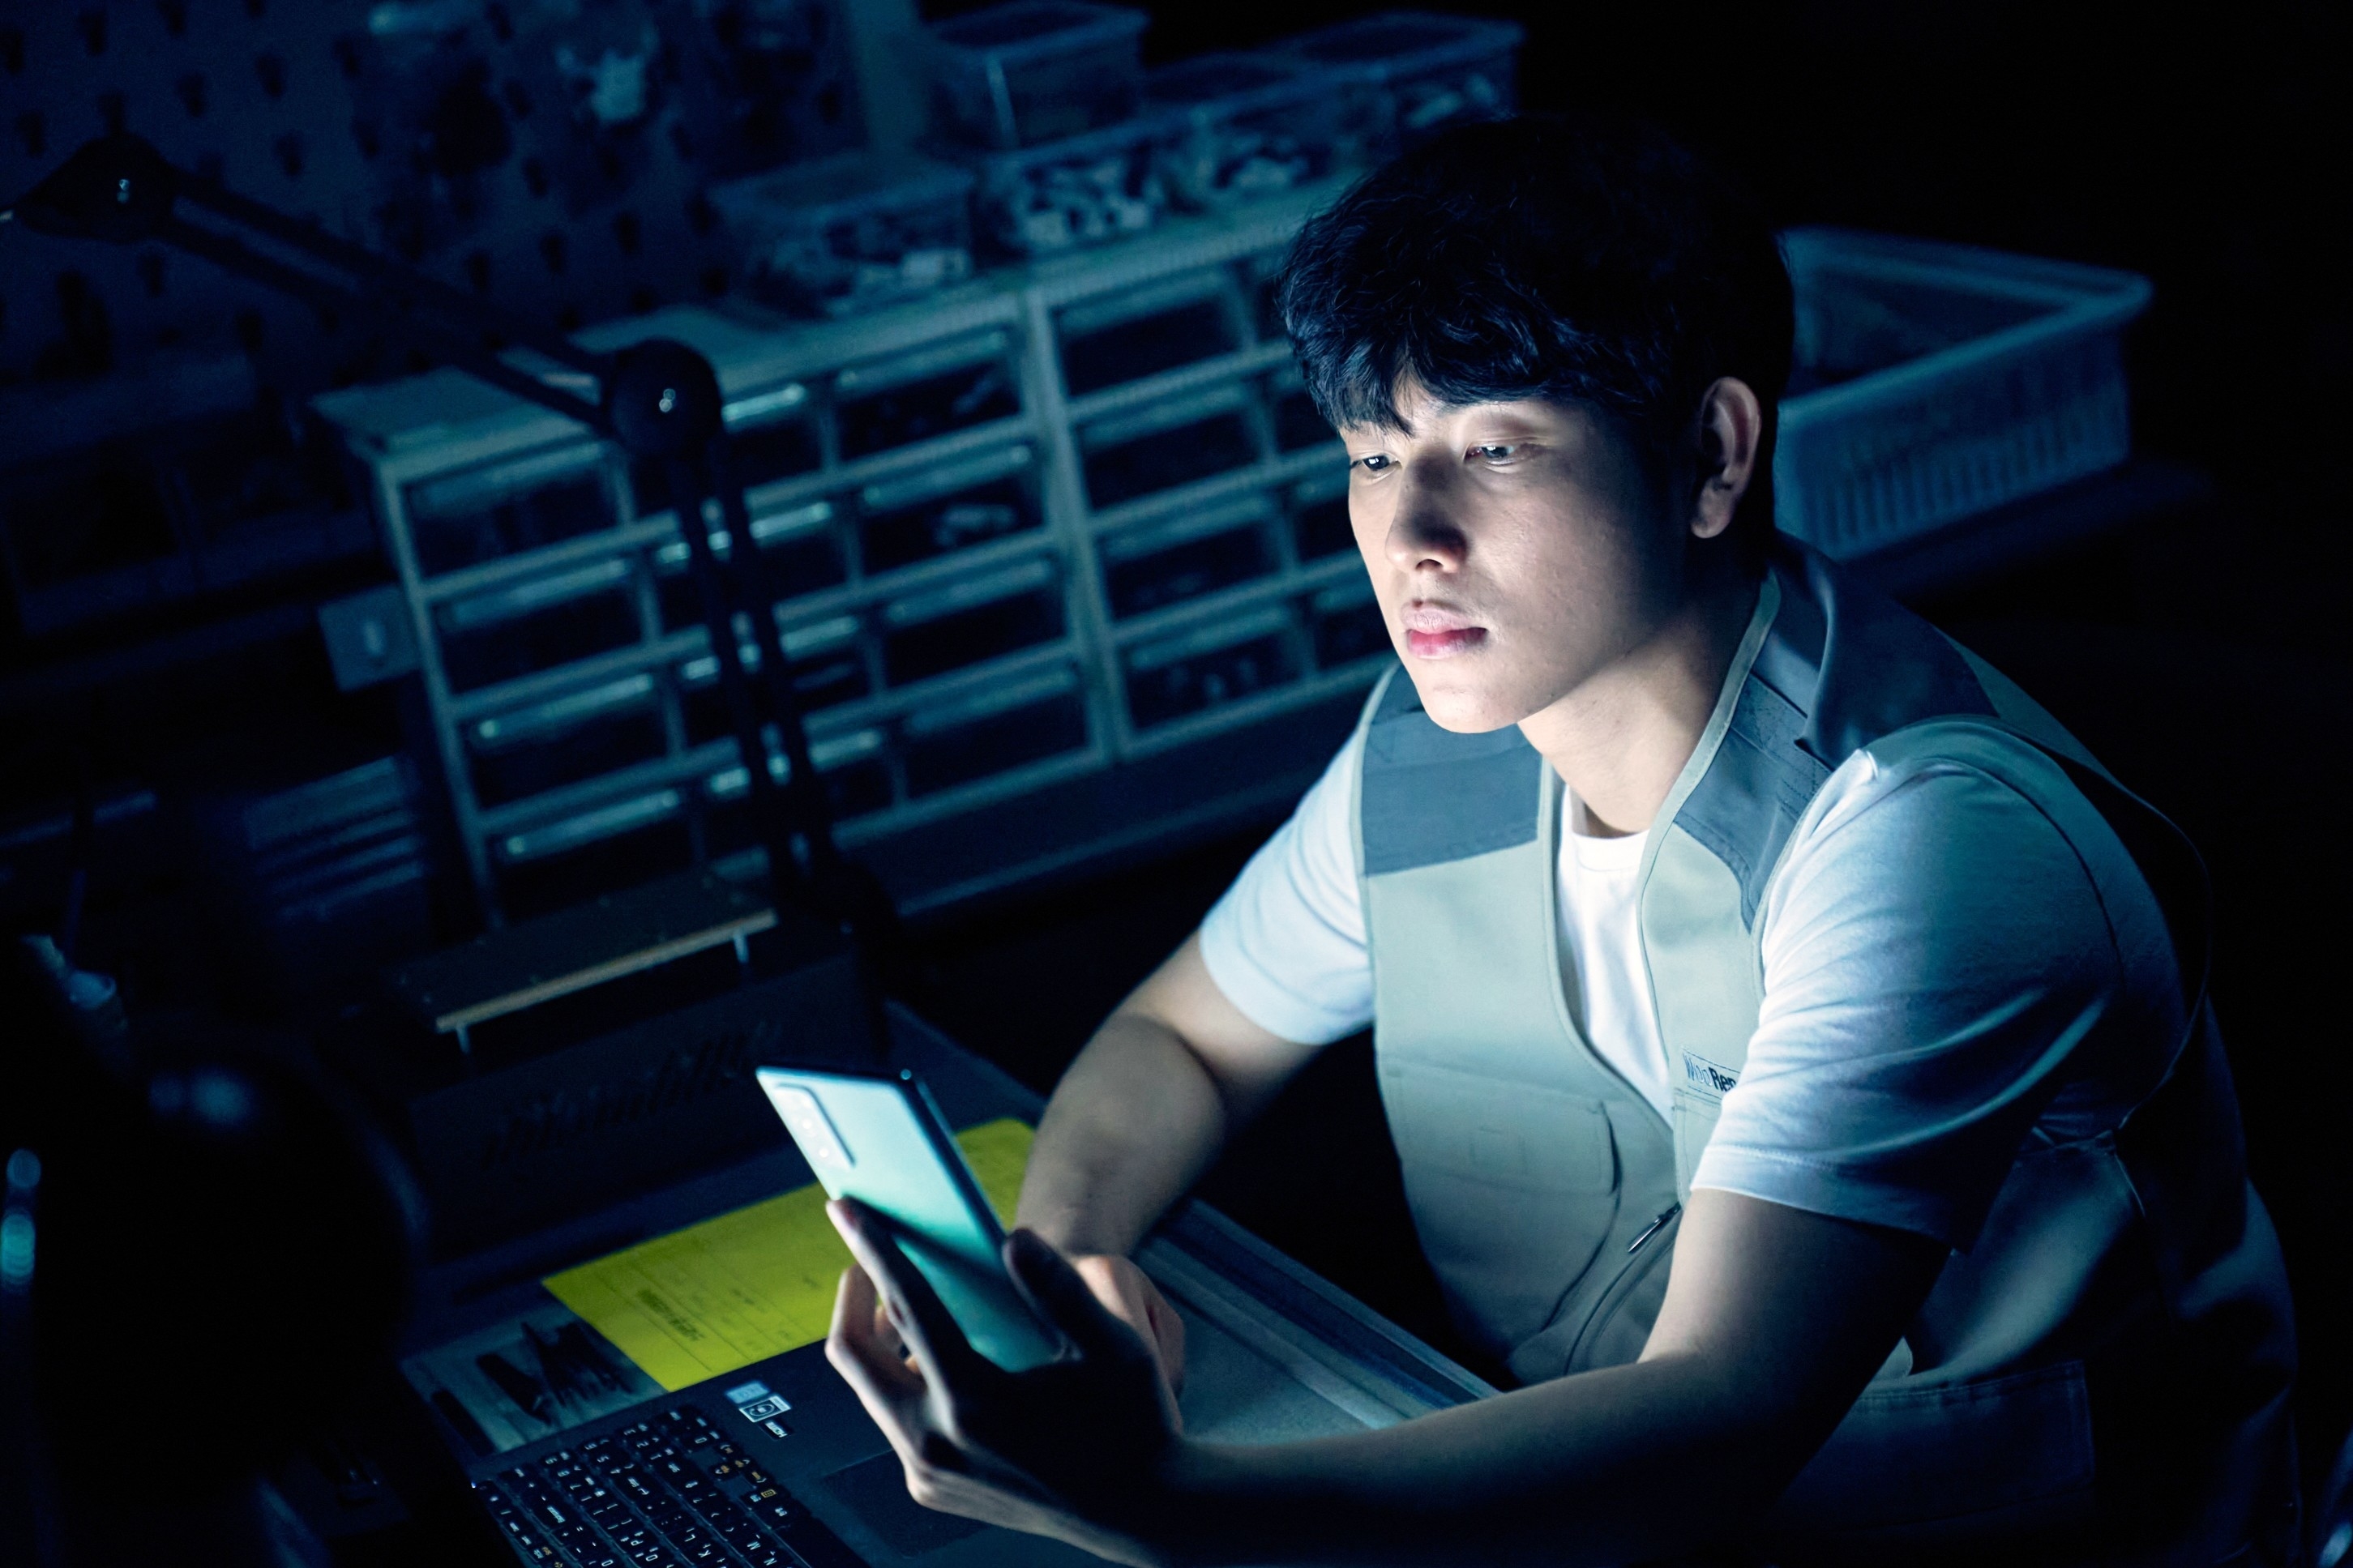 Oh Jun-yeong in a dark room looking at his phone screen with focus, laptop open nearby